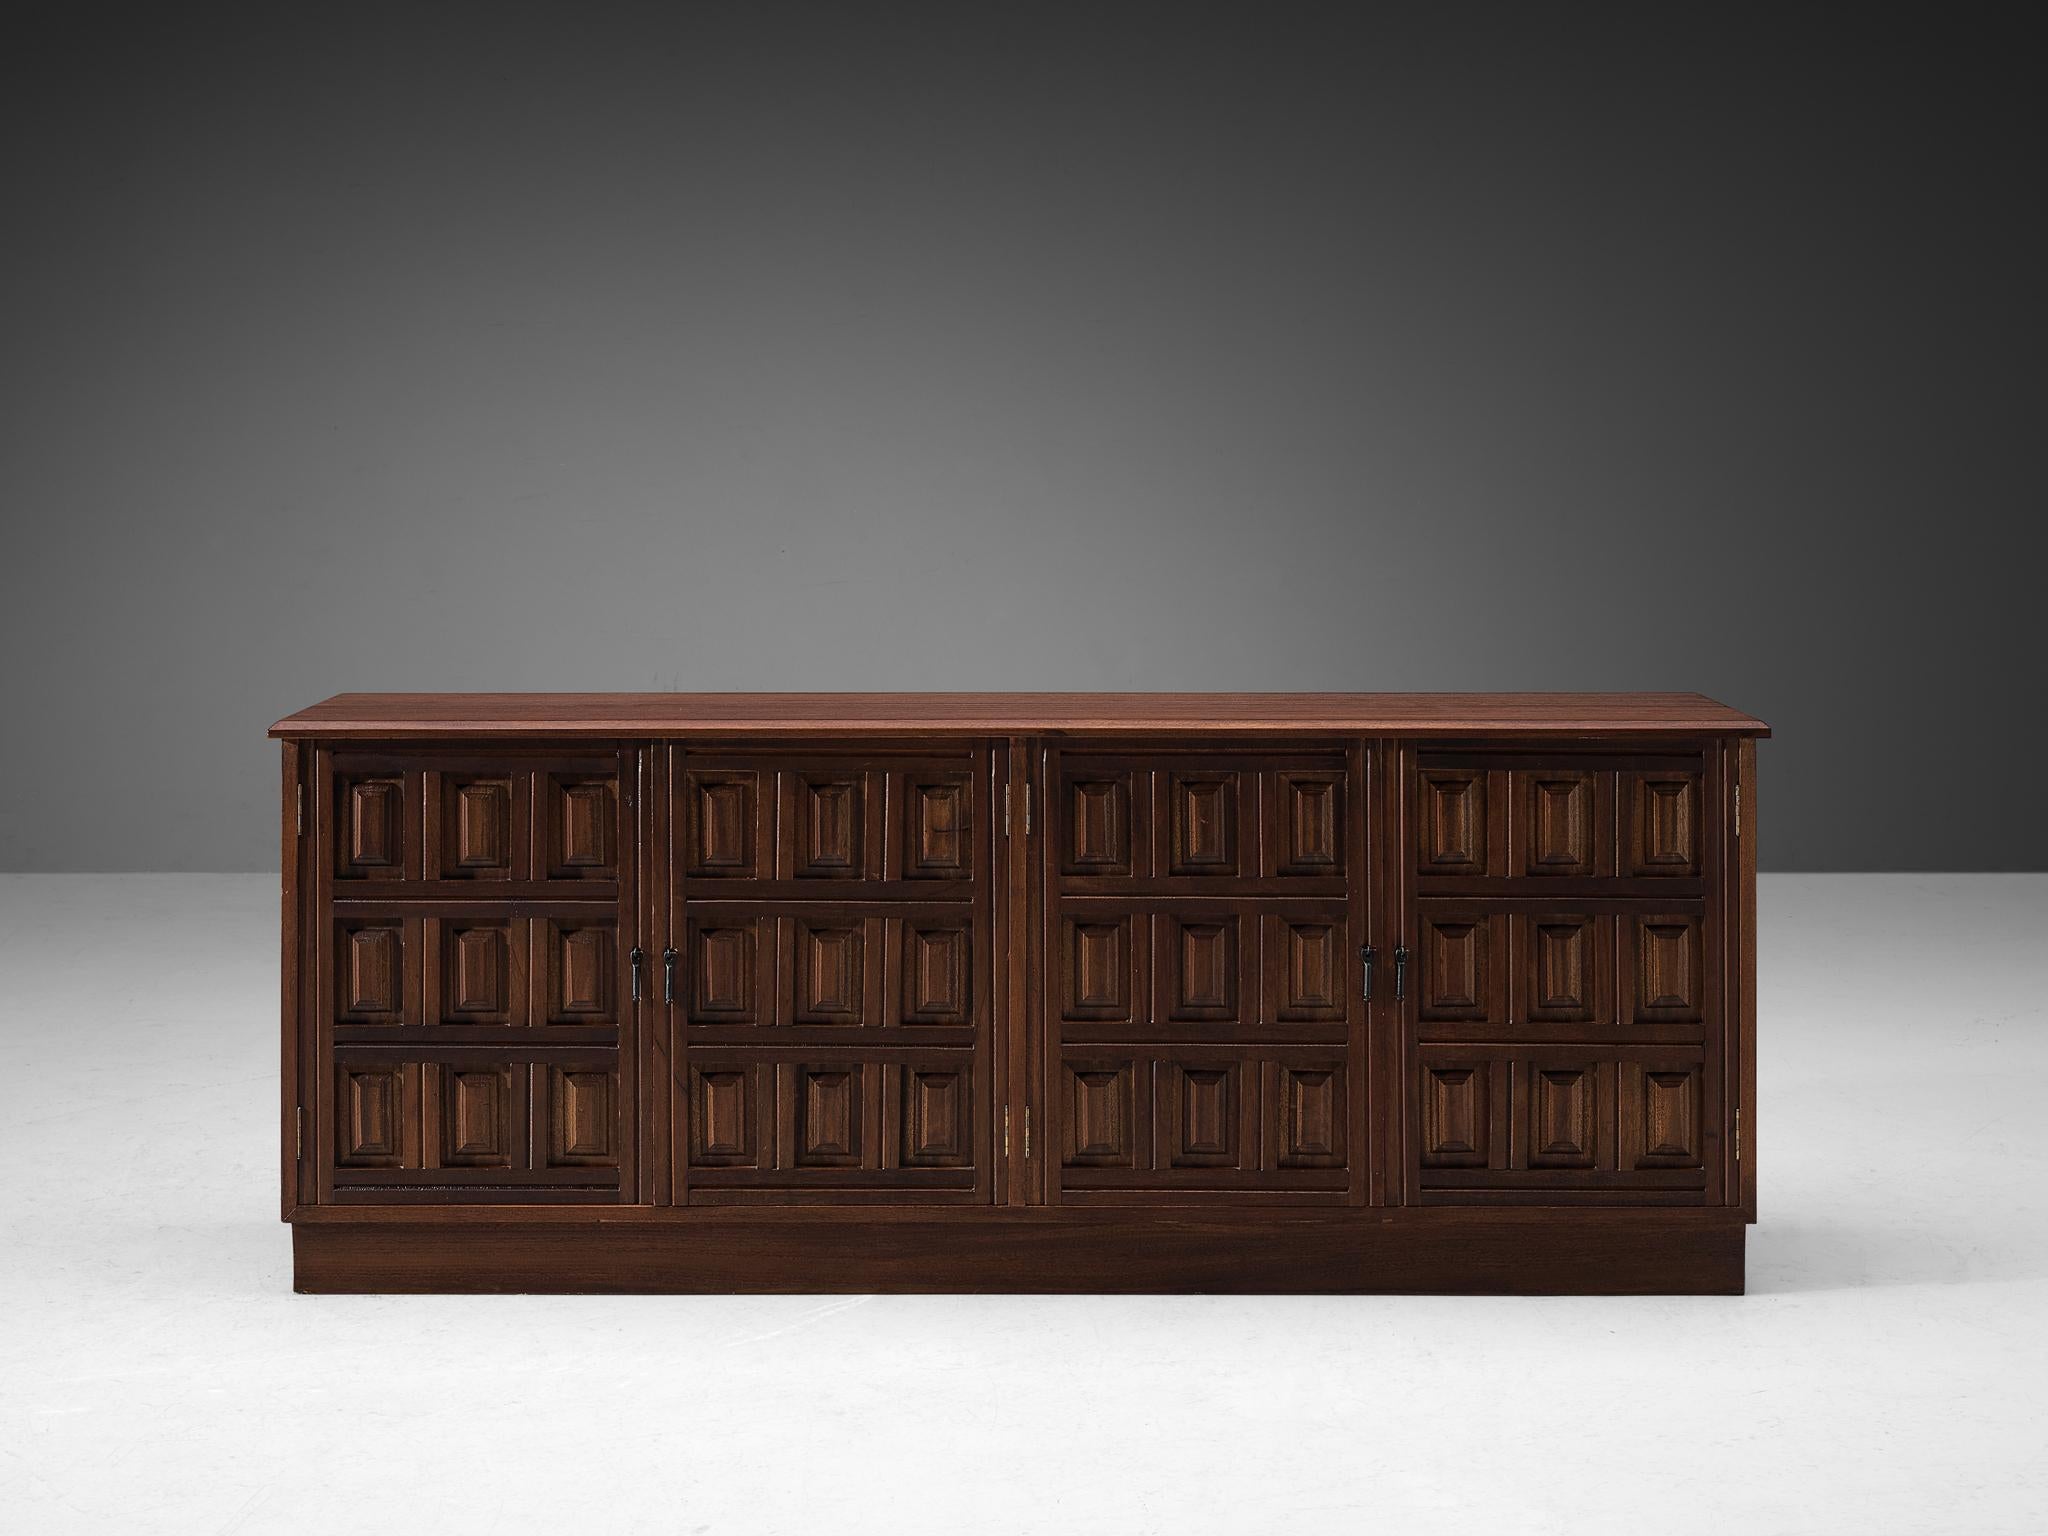 Sideboard, stained mahogany, metal, Spain, 1970s.

This very evocative sideboard features a clear rhythm and flow established by means of a well thought through lay out that is utterly well-balanced. The carved geometric shapes on the door panels